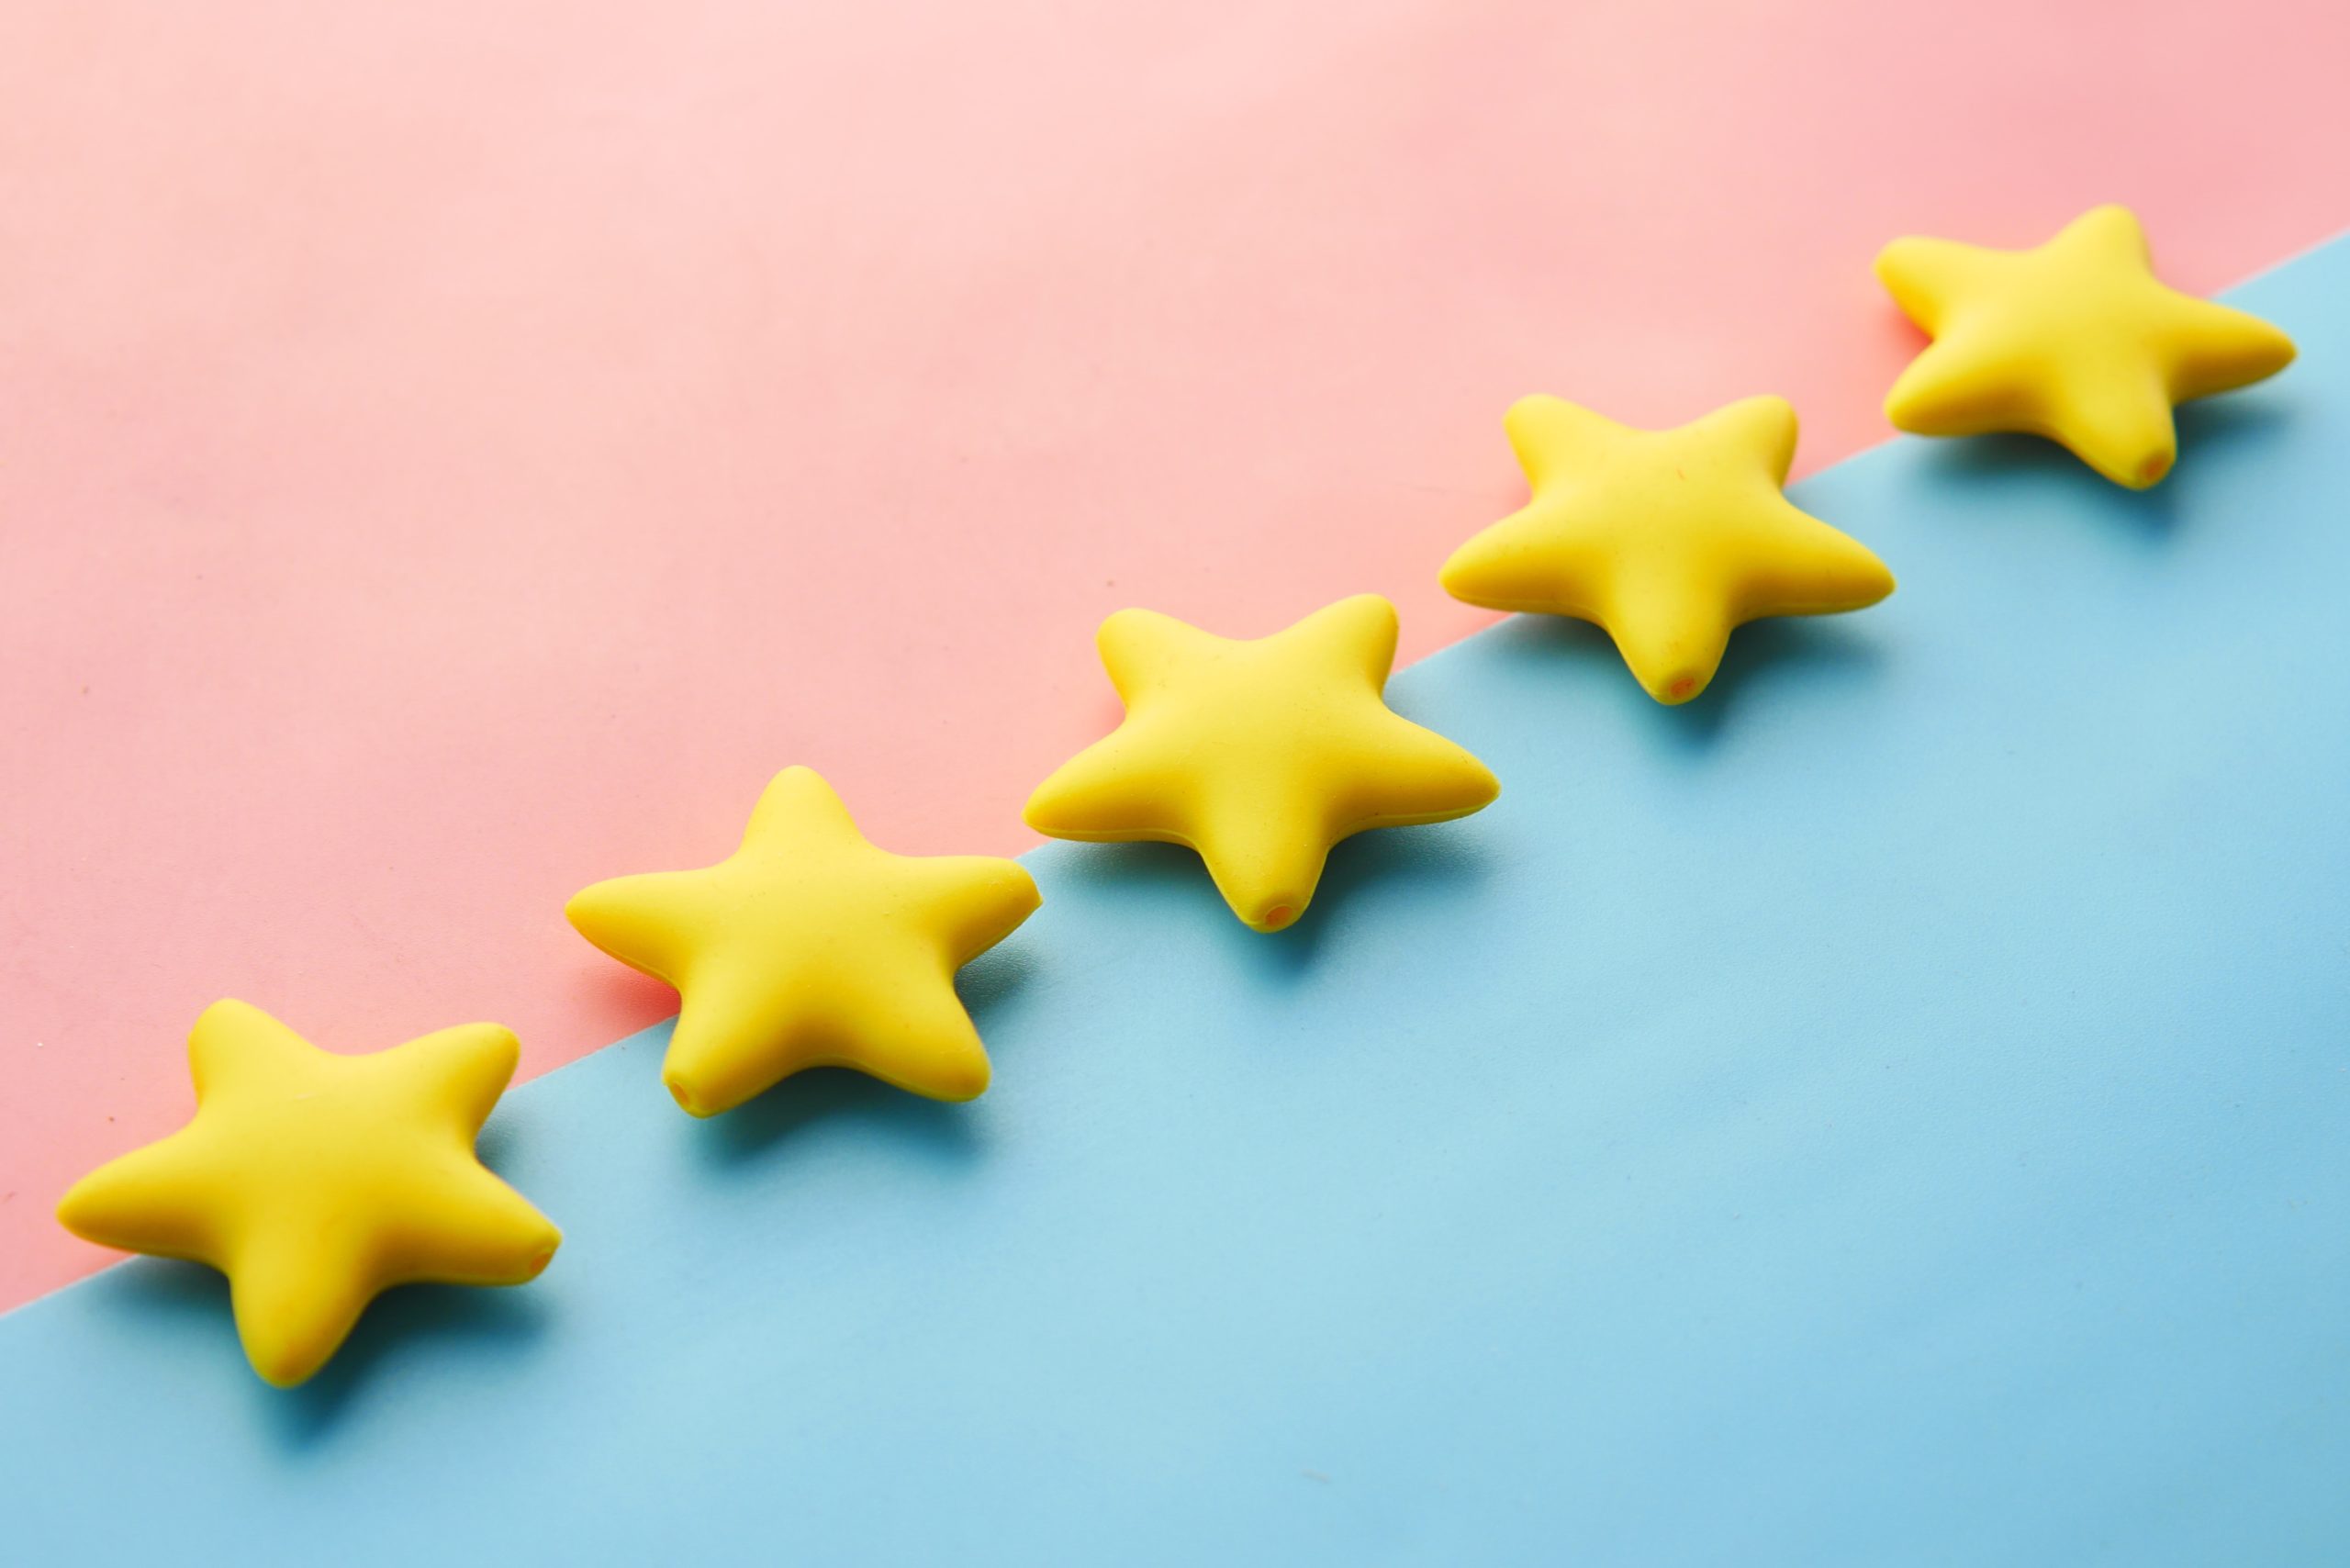 The following image depicts a star rating system similar in nature to the one used in rating Medicare Advantage Plans.